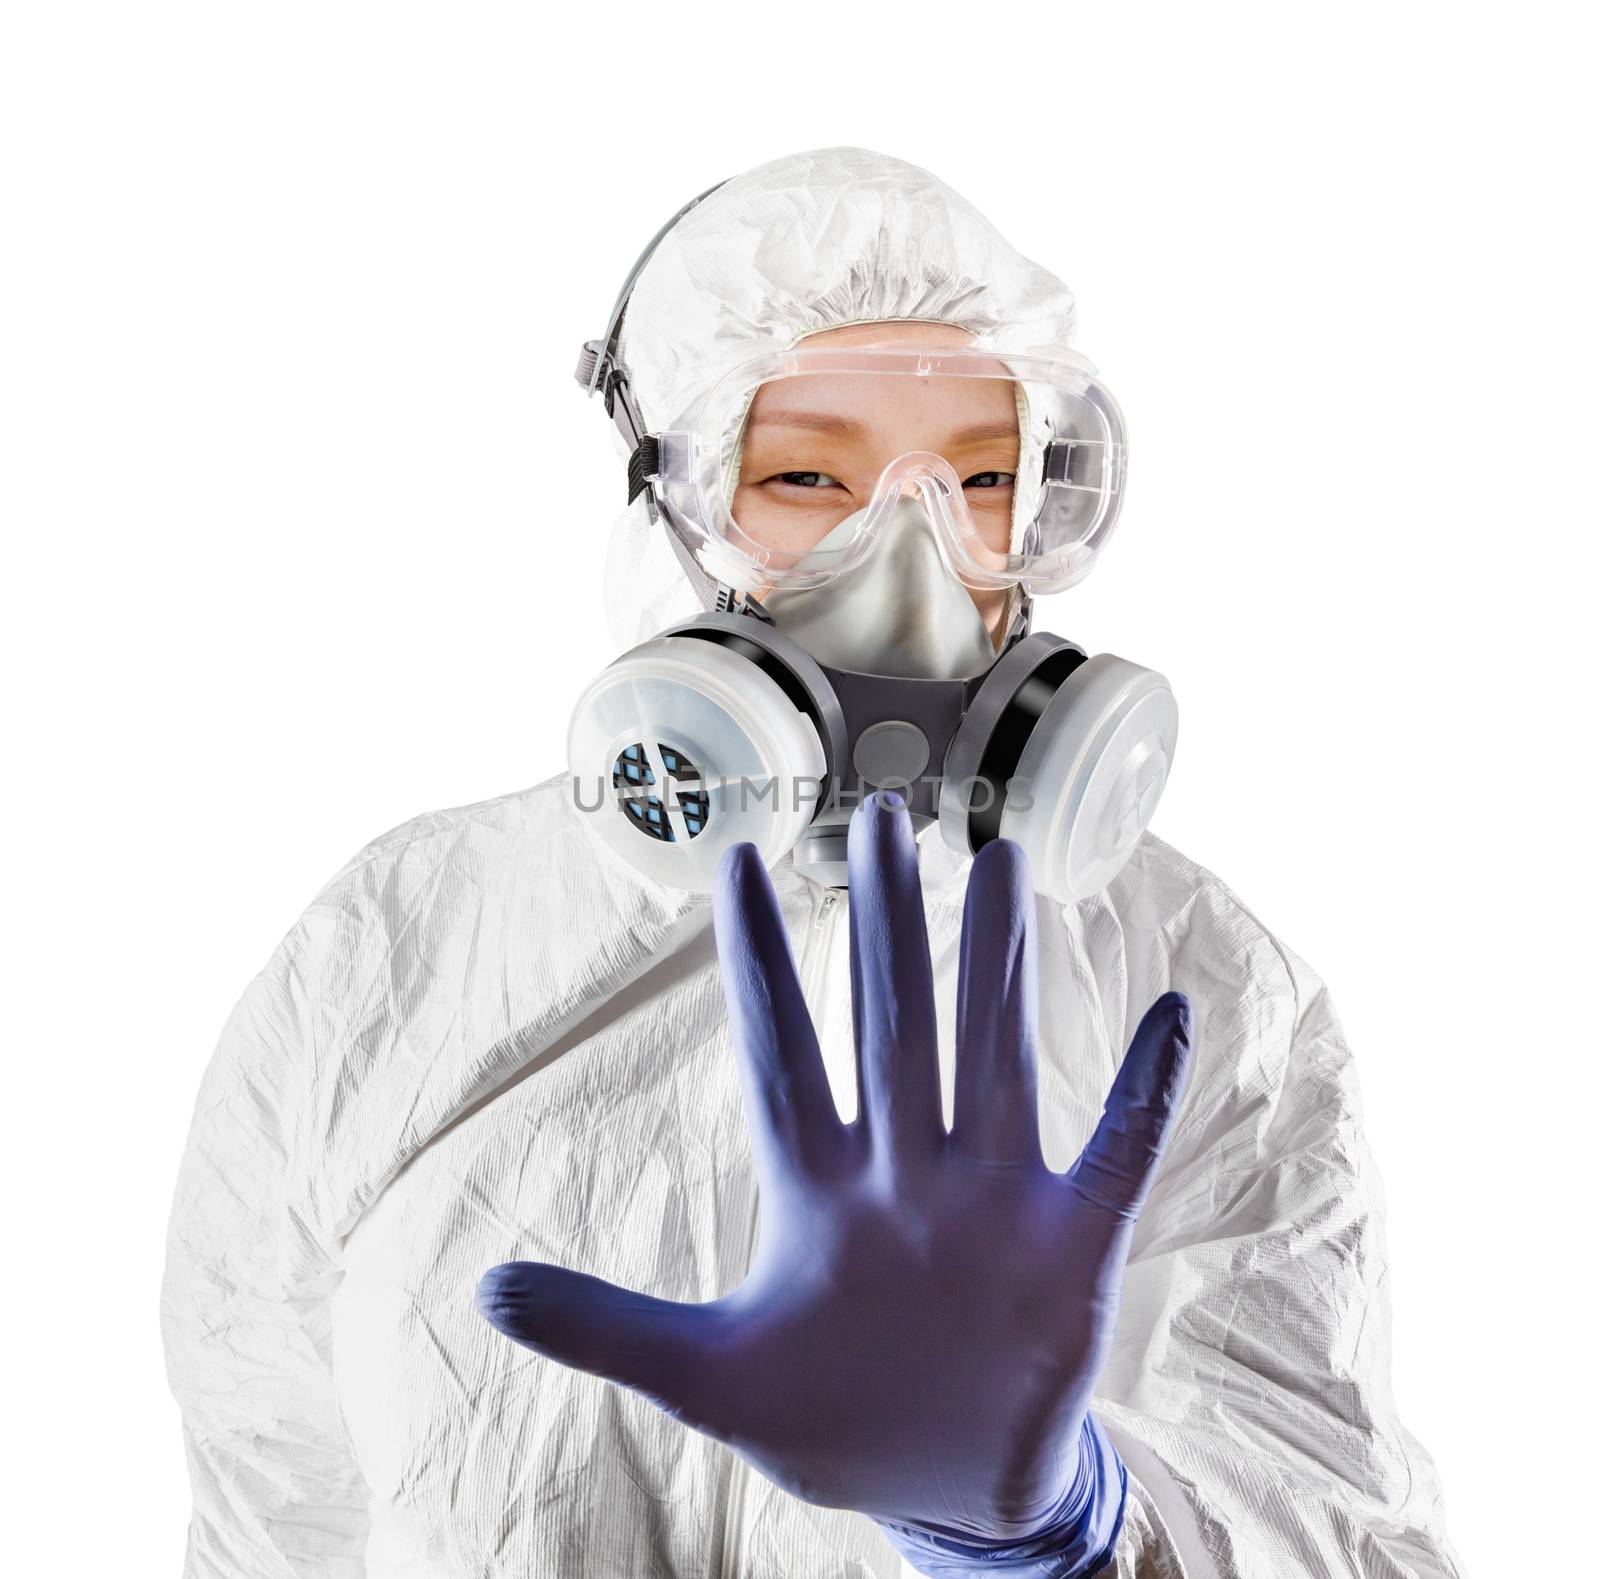 Chinese Woman Wearing Hazmat Suit, Protective Gas Mask and Goggles Isolated On White.